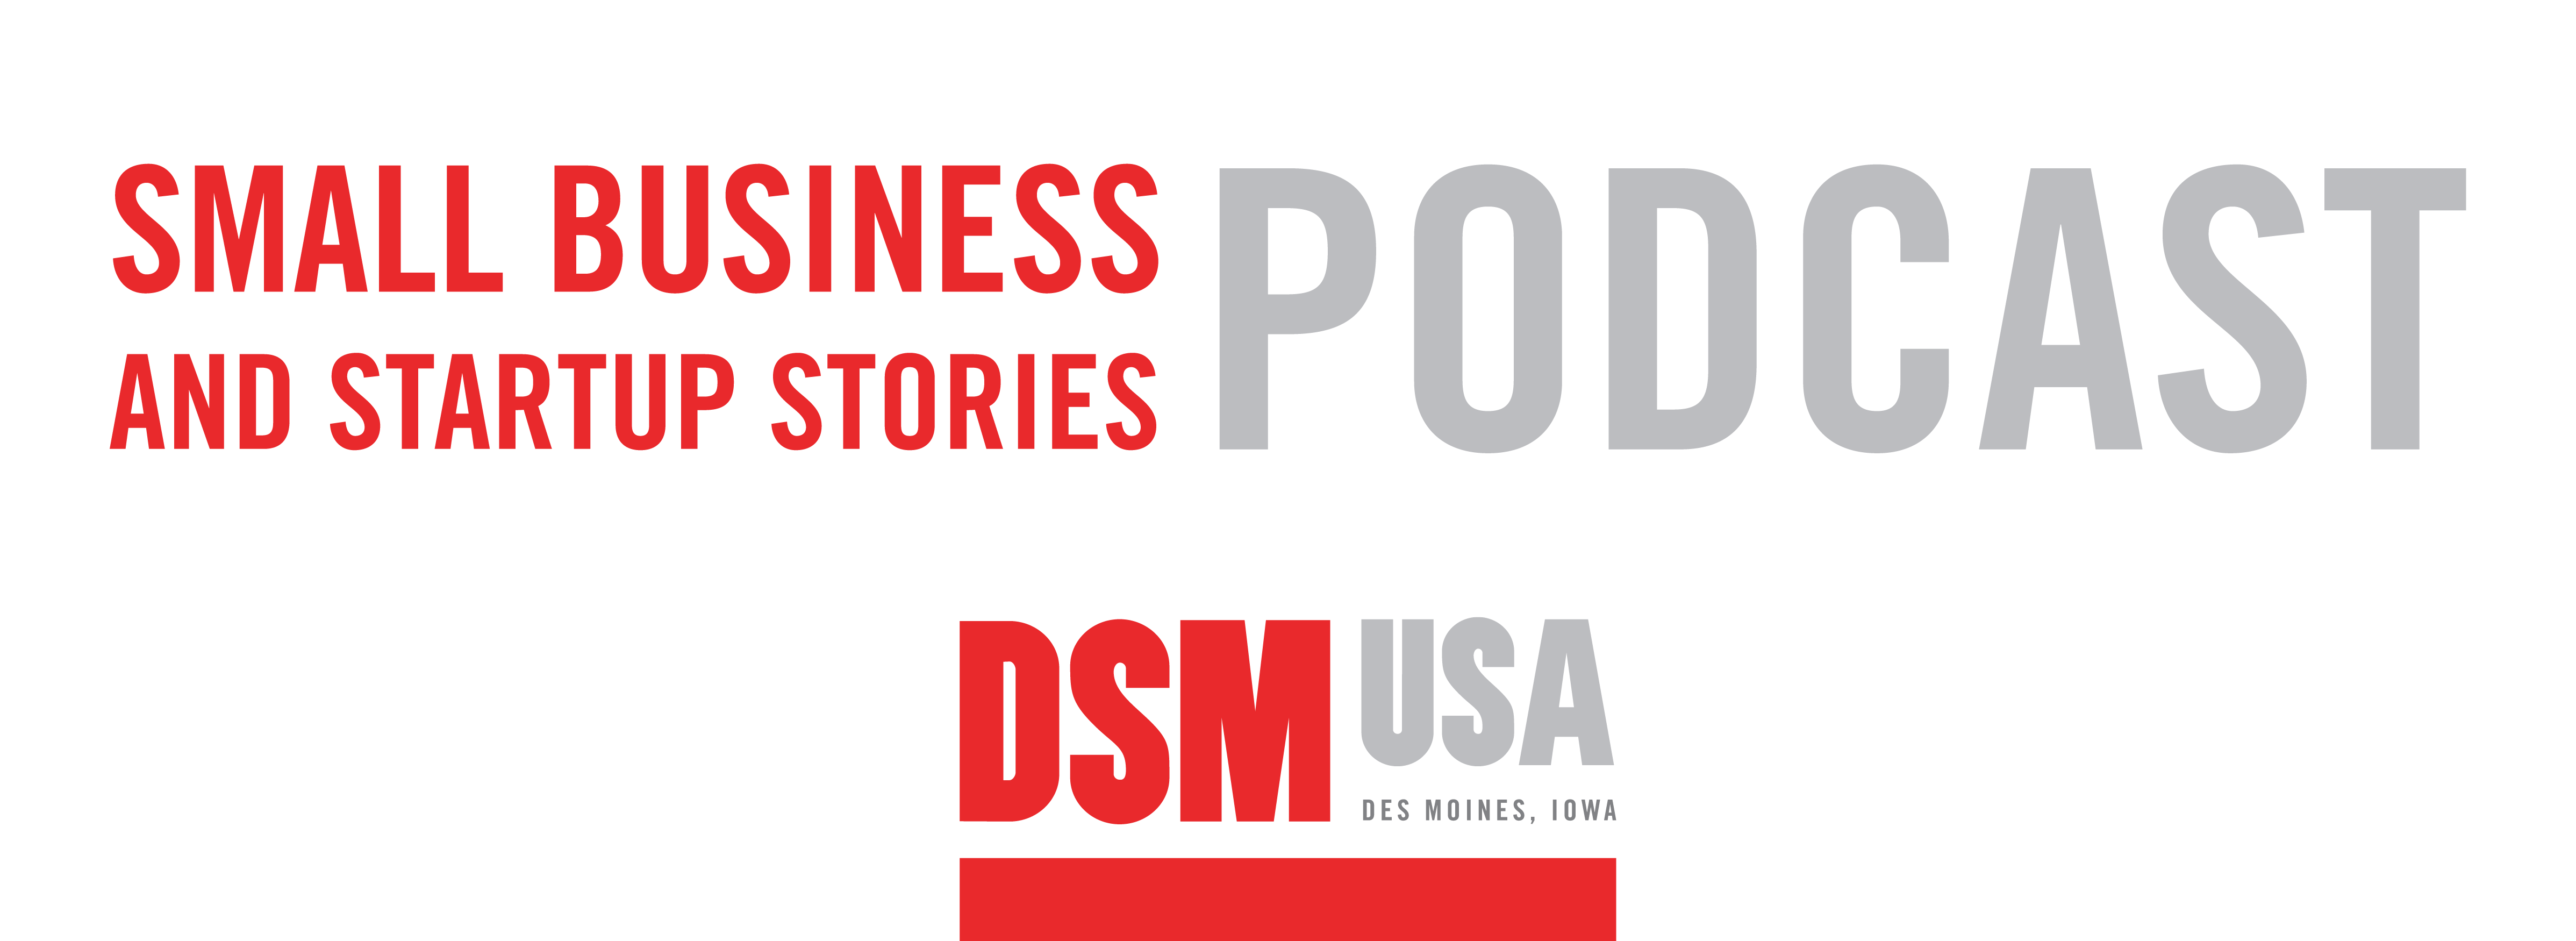 Episode 23: The Medical IT Industry